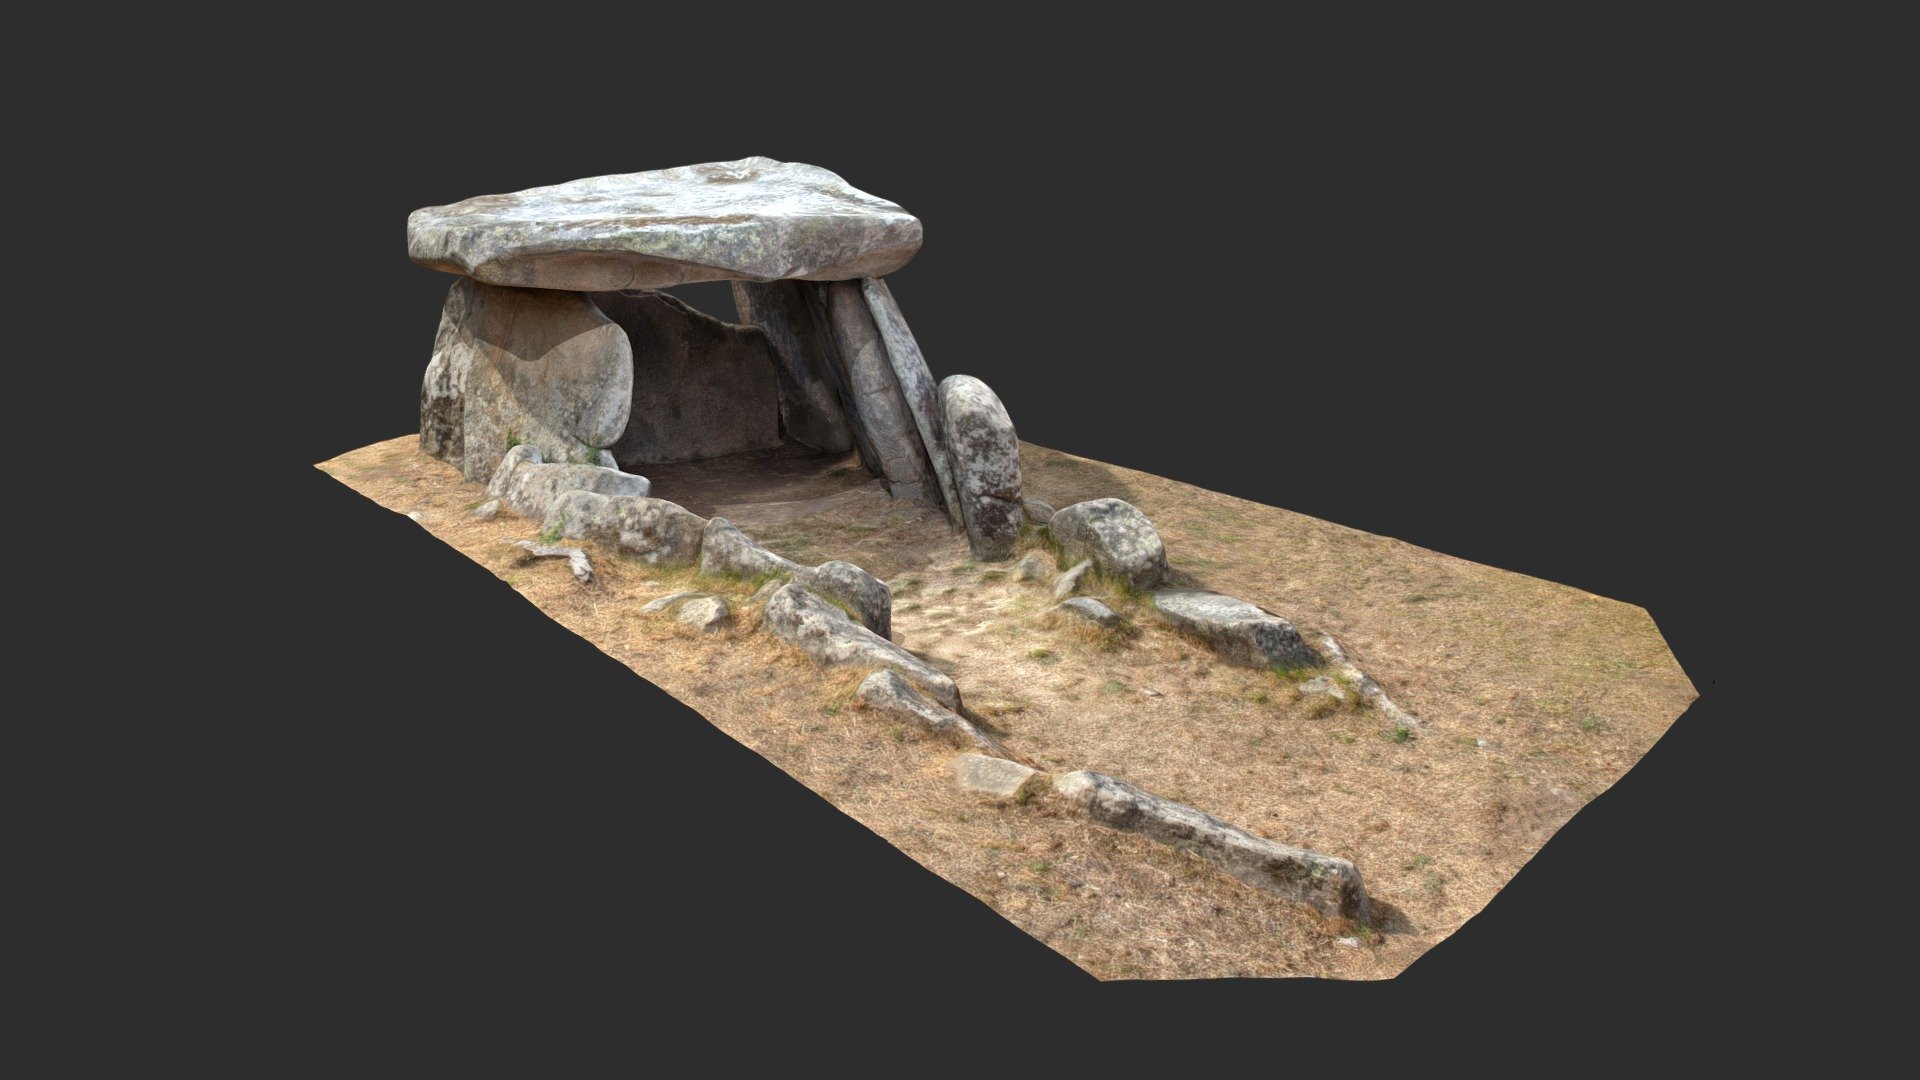 Megalithic funerary monument, consisting of the head and nine stone pillars, 30th century BC.  In 1910 it was declared a national monument, as it is one of the most emblematic megalithic monuments on the Iberian Peninsula. It is located in Vila Praia de Âncora, Portugal 3d model